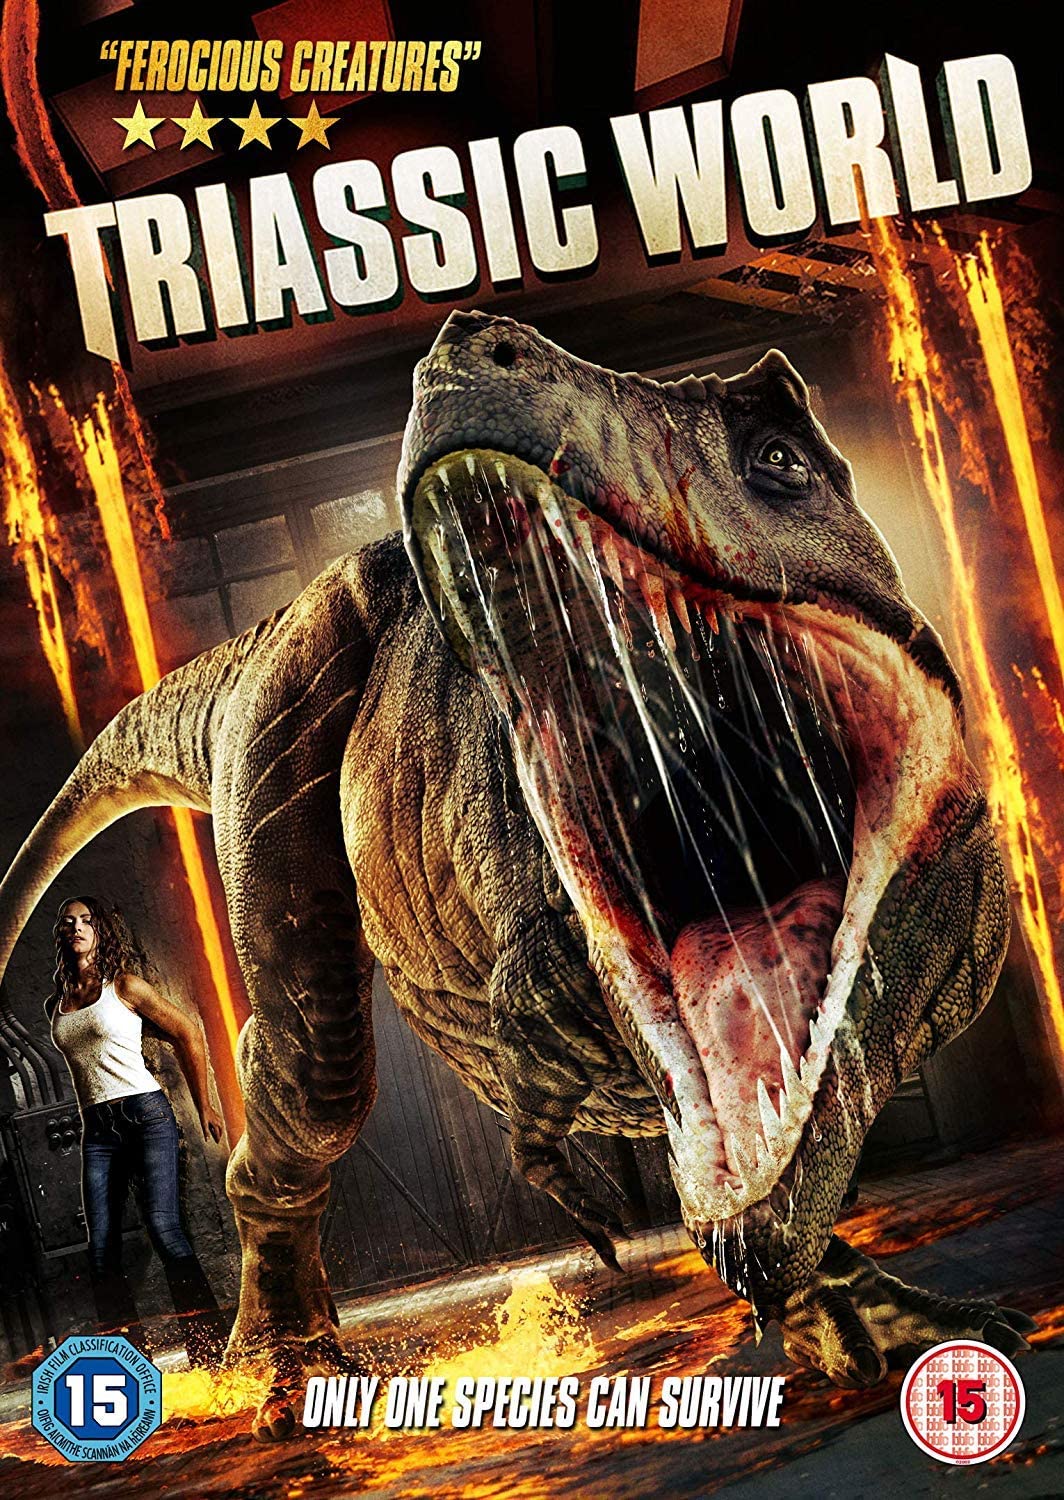 Triassic World - Action/Horror [DVD]